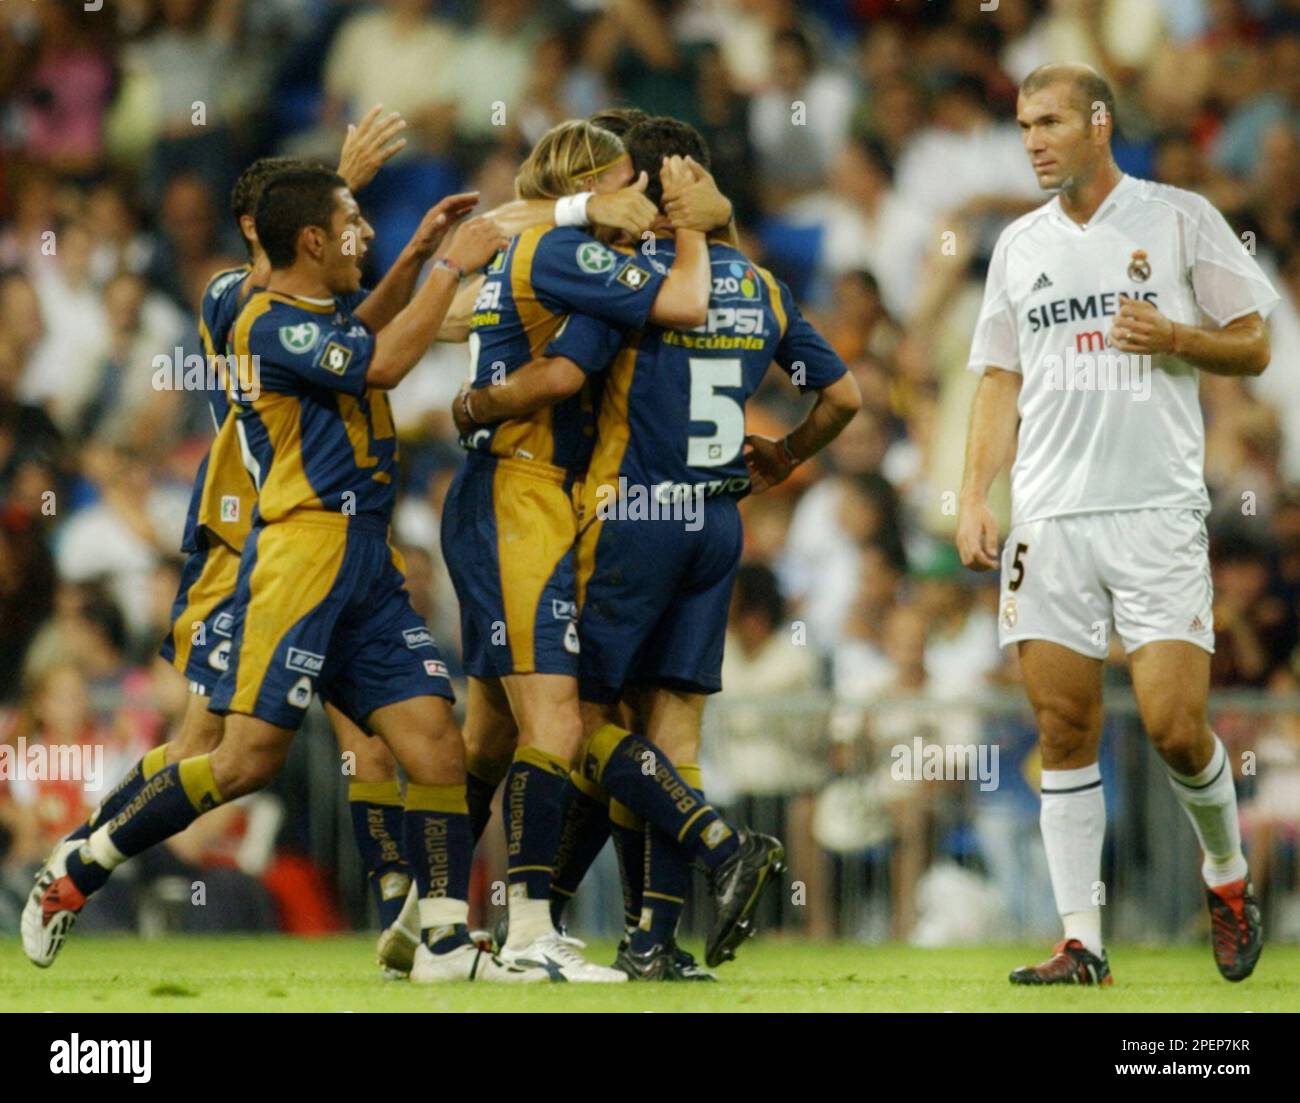 Mexican team Pumas players celebrate beside Real Madrid's French player  Zinedine Zidane after scoring a goal during a friendly soccer match in  Real's Santiago Bernabeu stadium in Madrid Tuesday Aug. 31, 2004. (